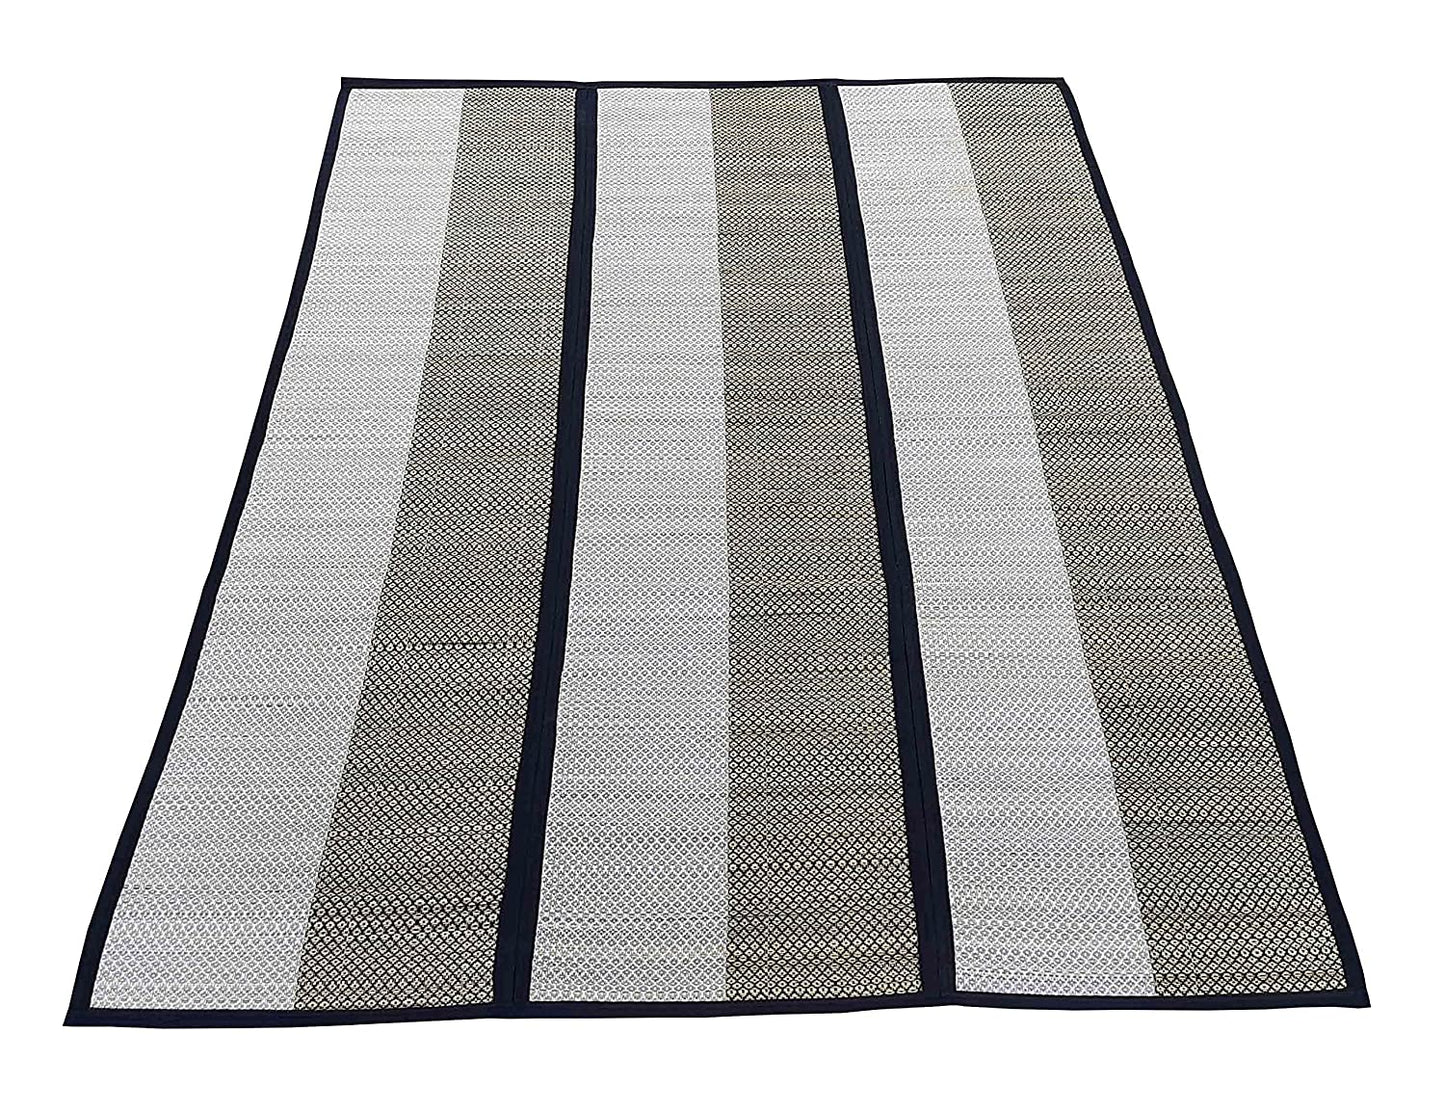 Chatai Mat Foldable handwoven Organic made of Madurkathi Grass for Multipurpose Use - T3-12